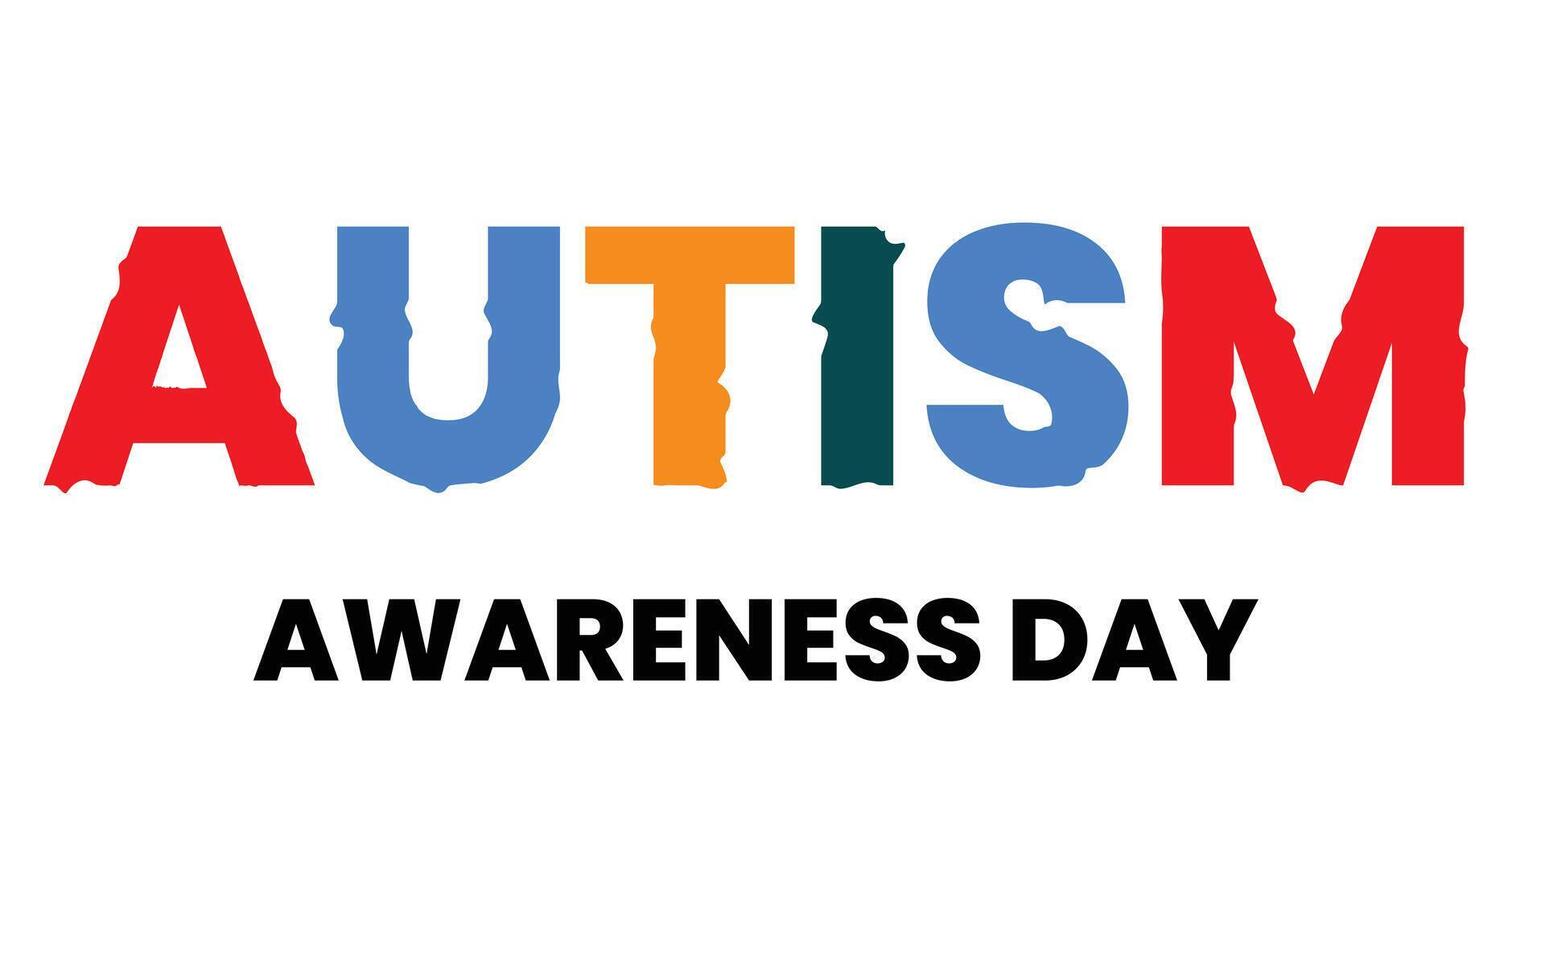 World Autism Awareness Day A Journey Through Autism vector